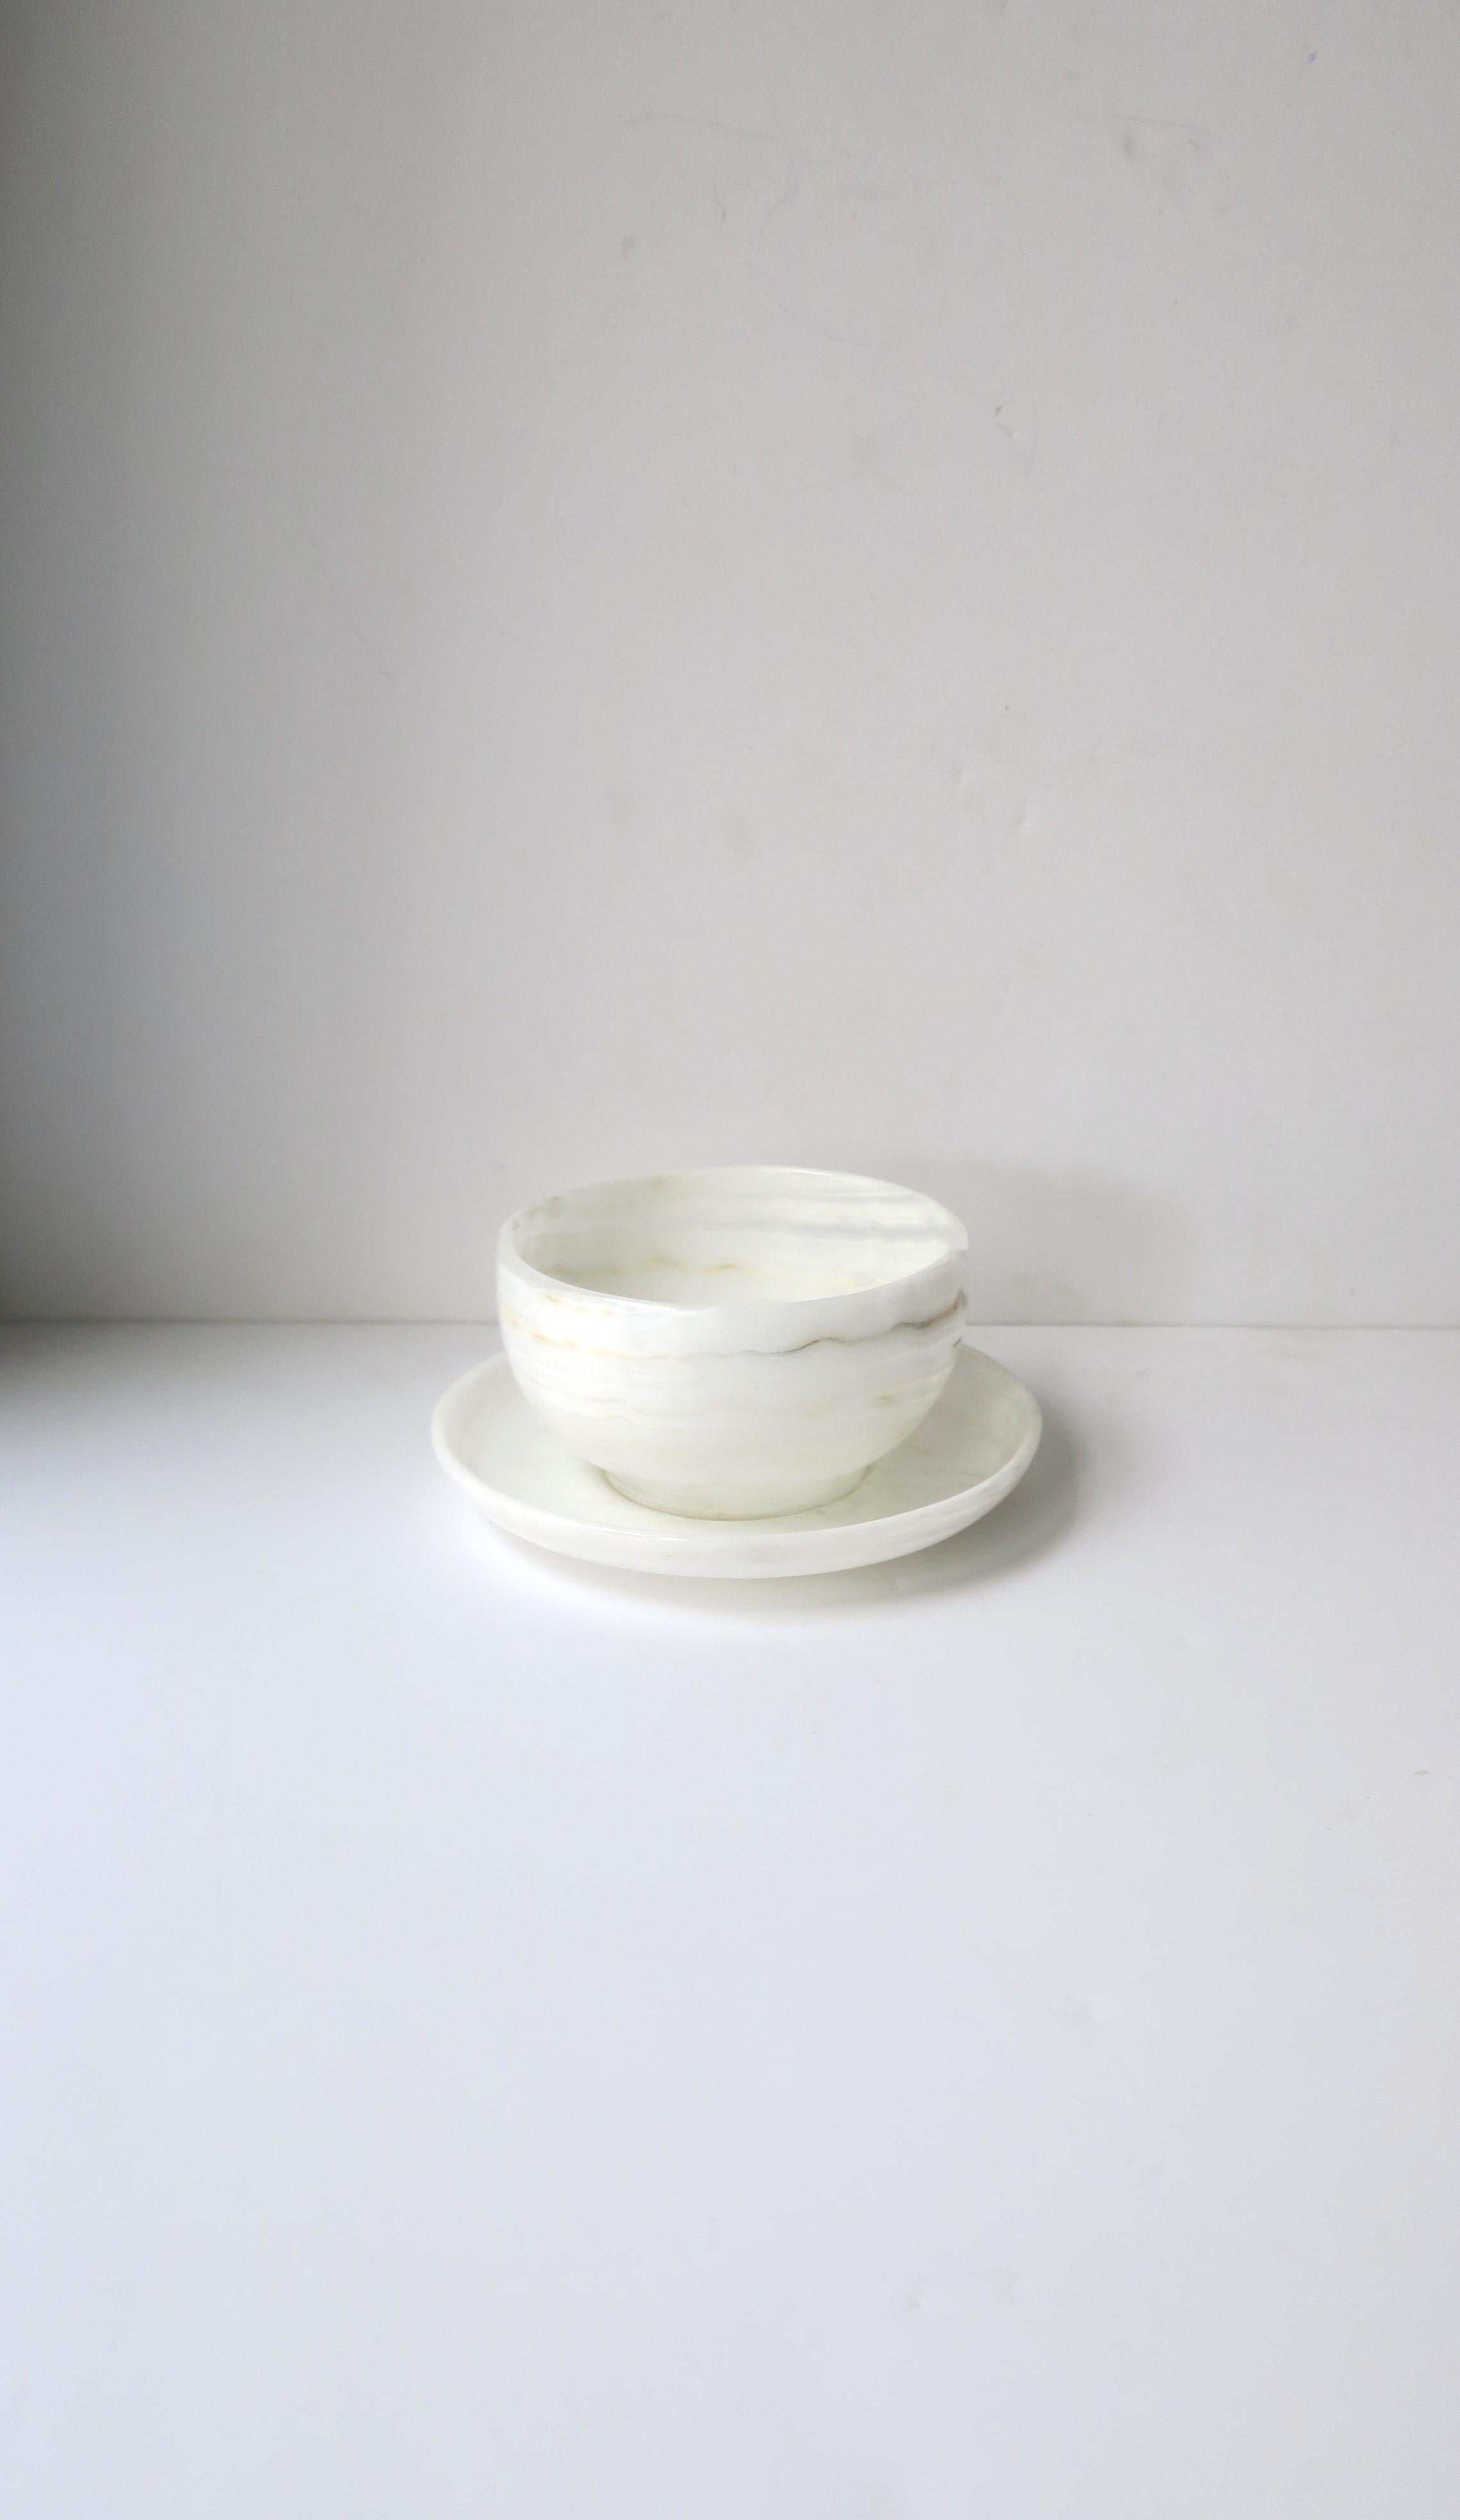 Polished White Onyx Marble Bowl and Saucer